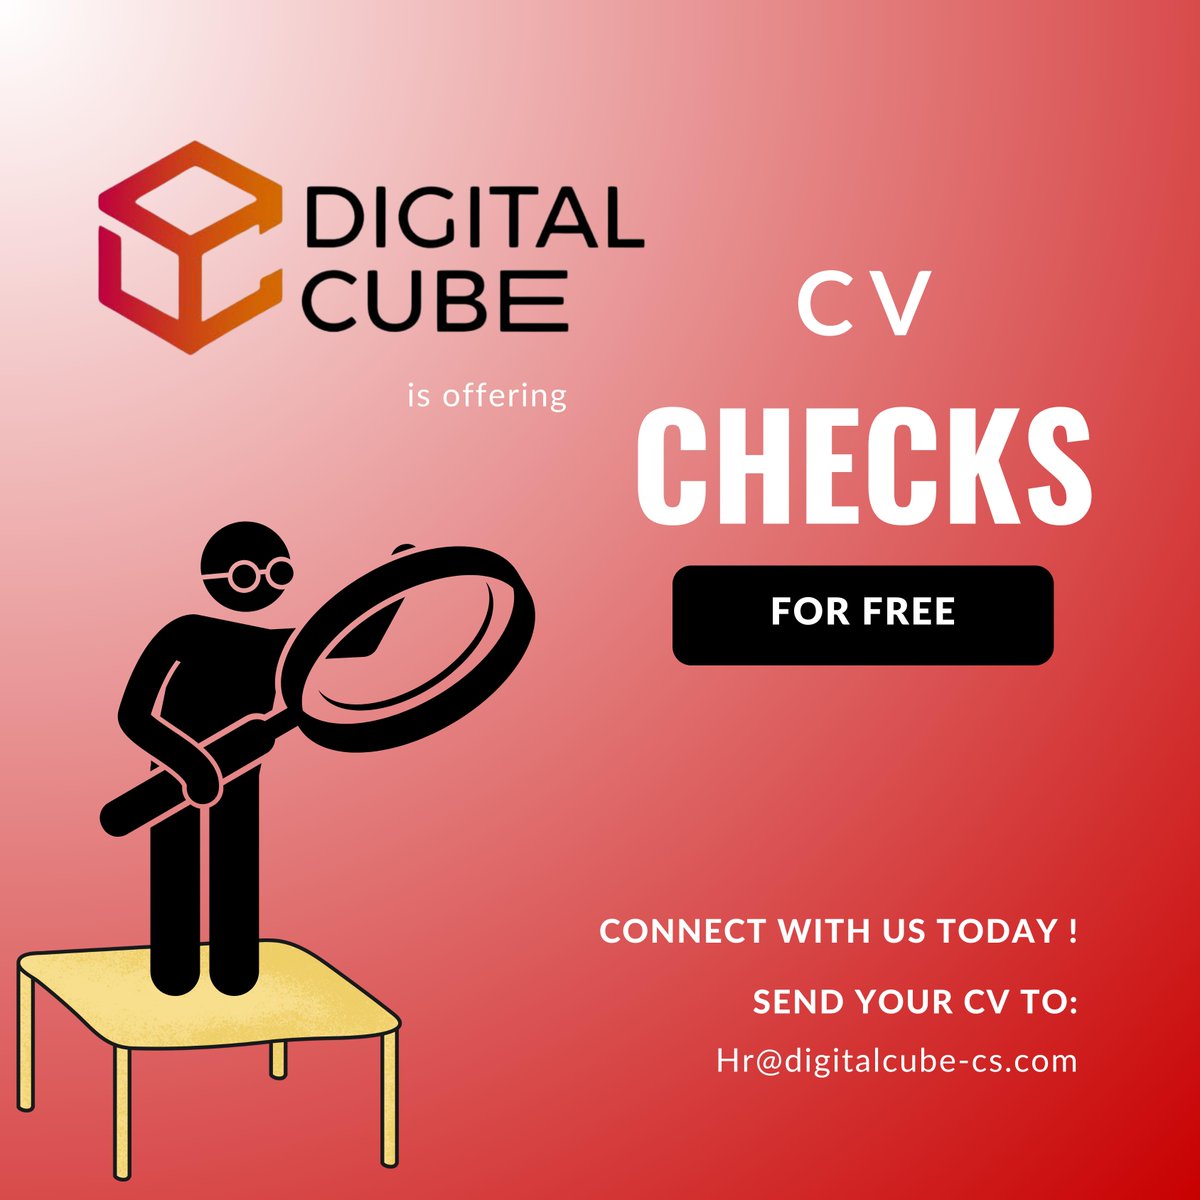 Attention all job seekers ‼️
Are you tired of constantly updating your CV and still not getting any responses from employers? For a limited time only, We are offering the first 5 CV checks for FREE! That's right, you heard me, FREE!🙌

#CVcheck #careercoaching #jobsearch